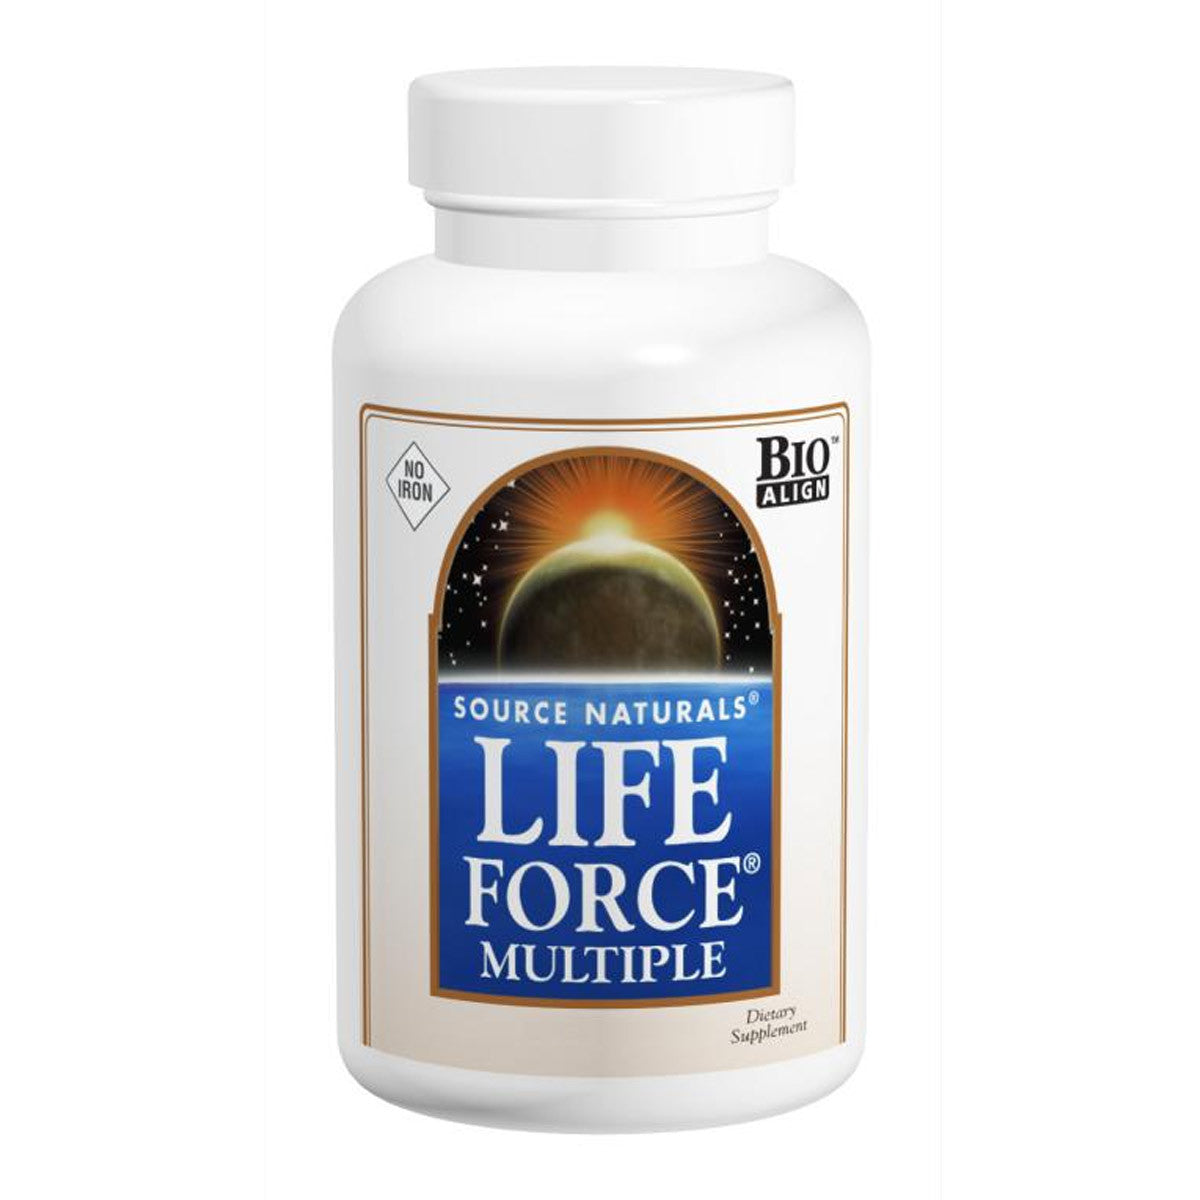 Primary image of Life Force Multiple (Iron Free)